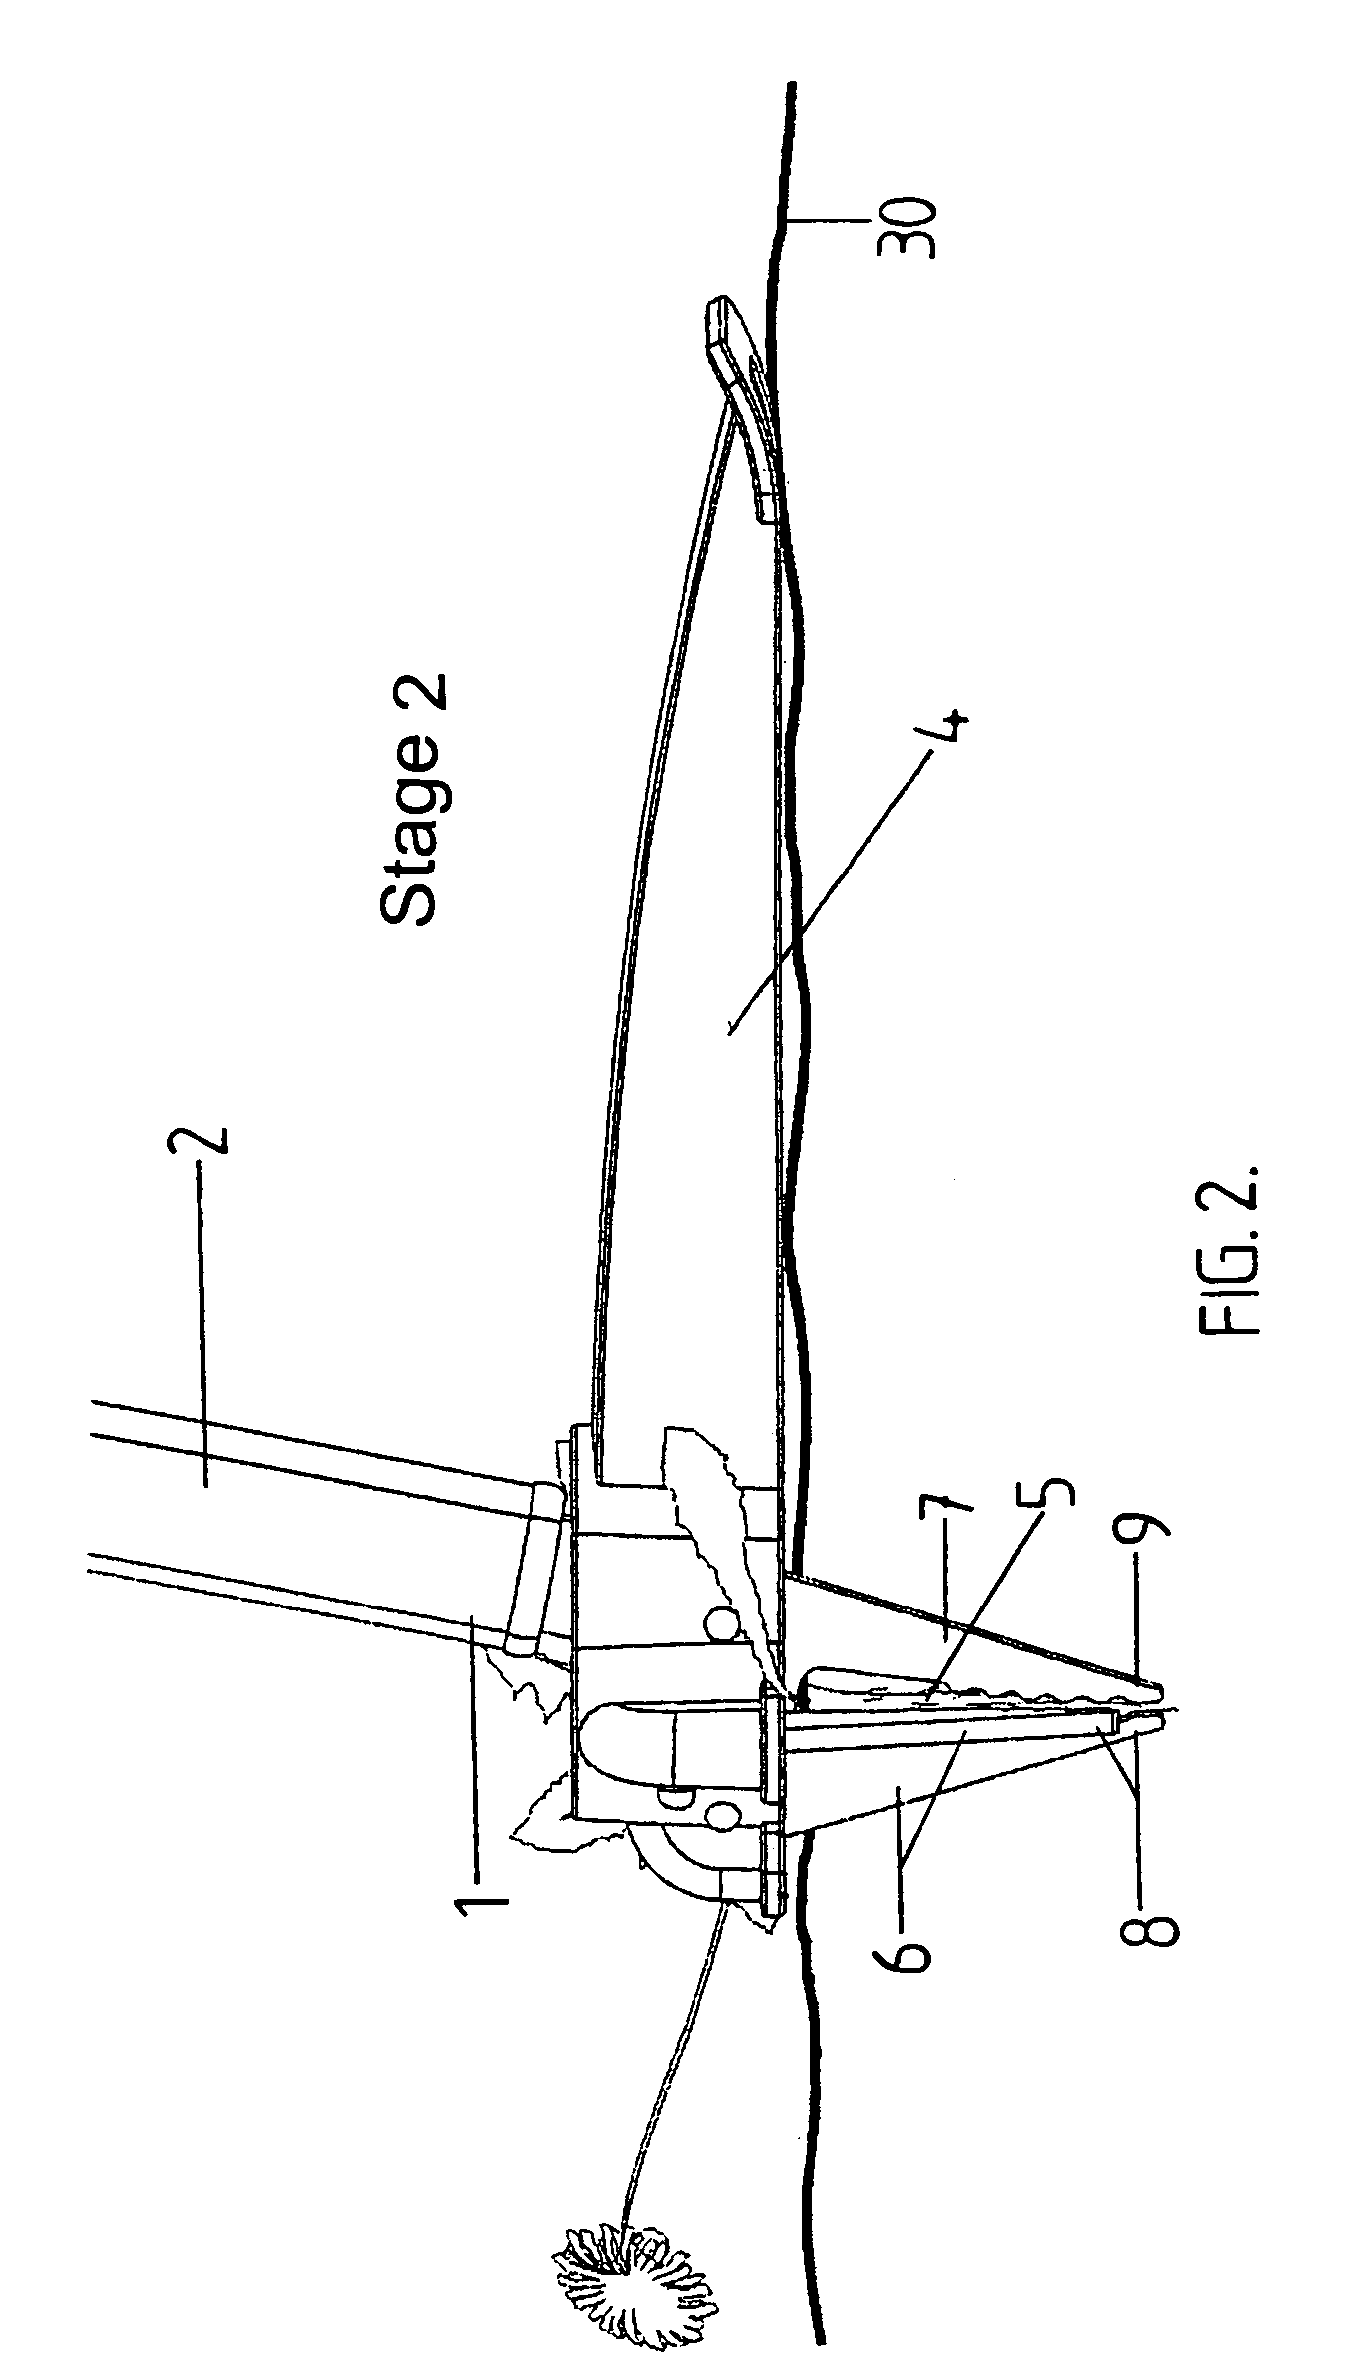 Device for removing plants or the like from ground